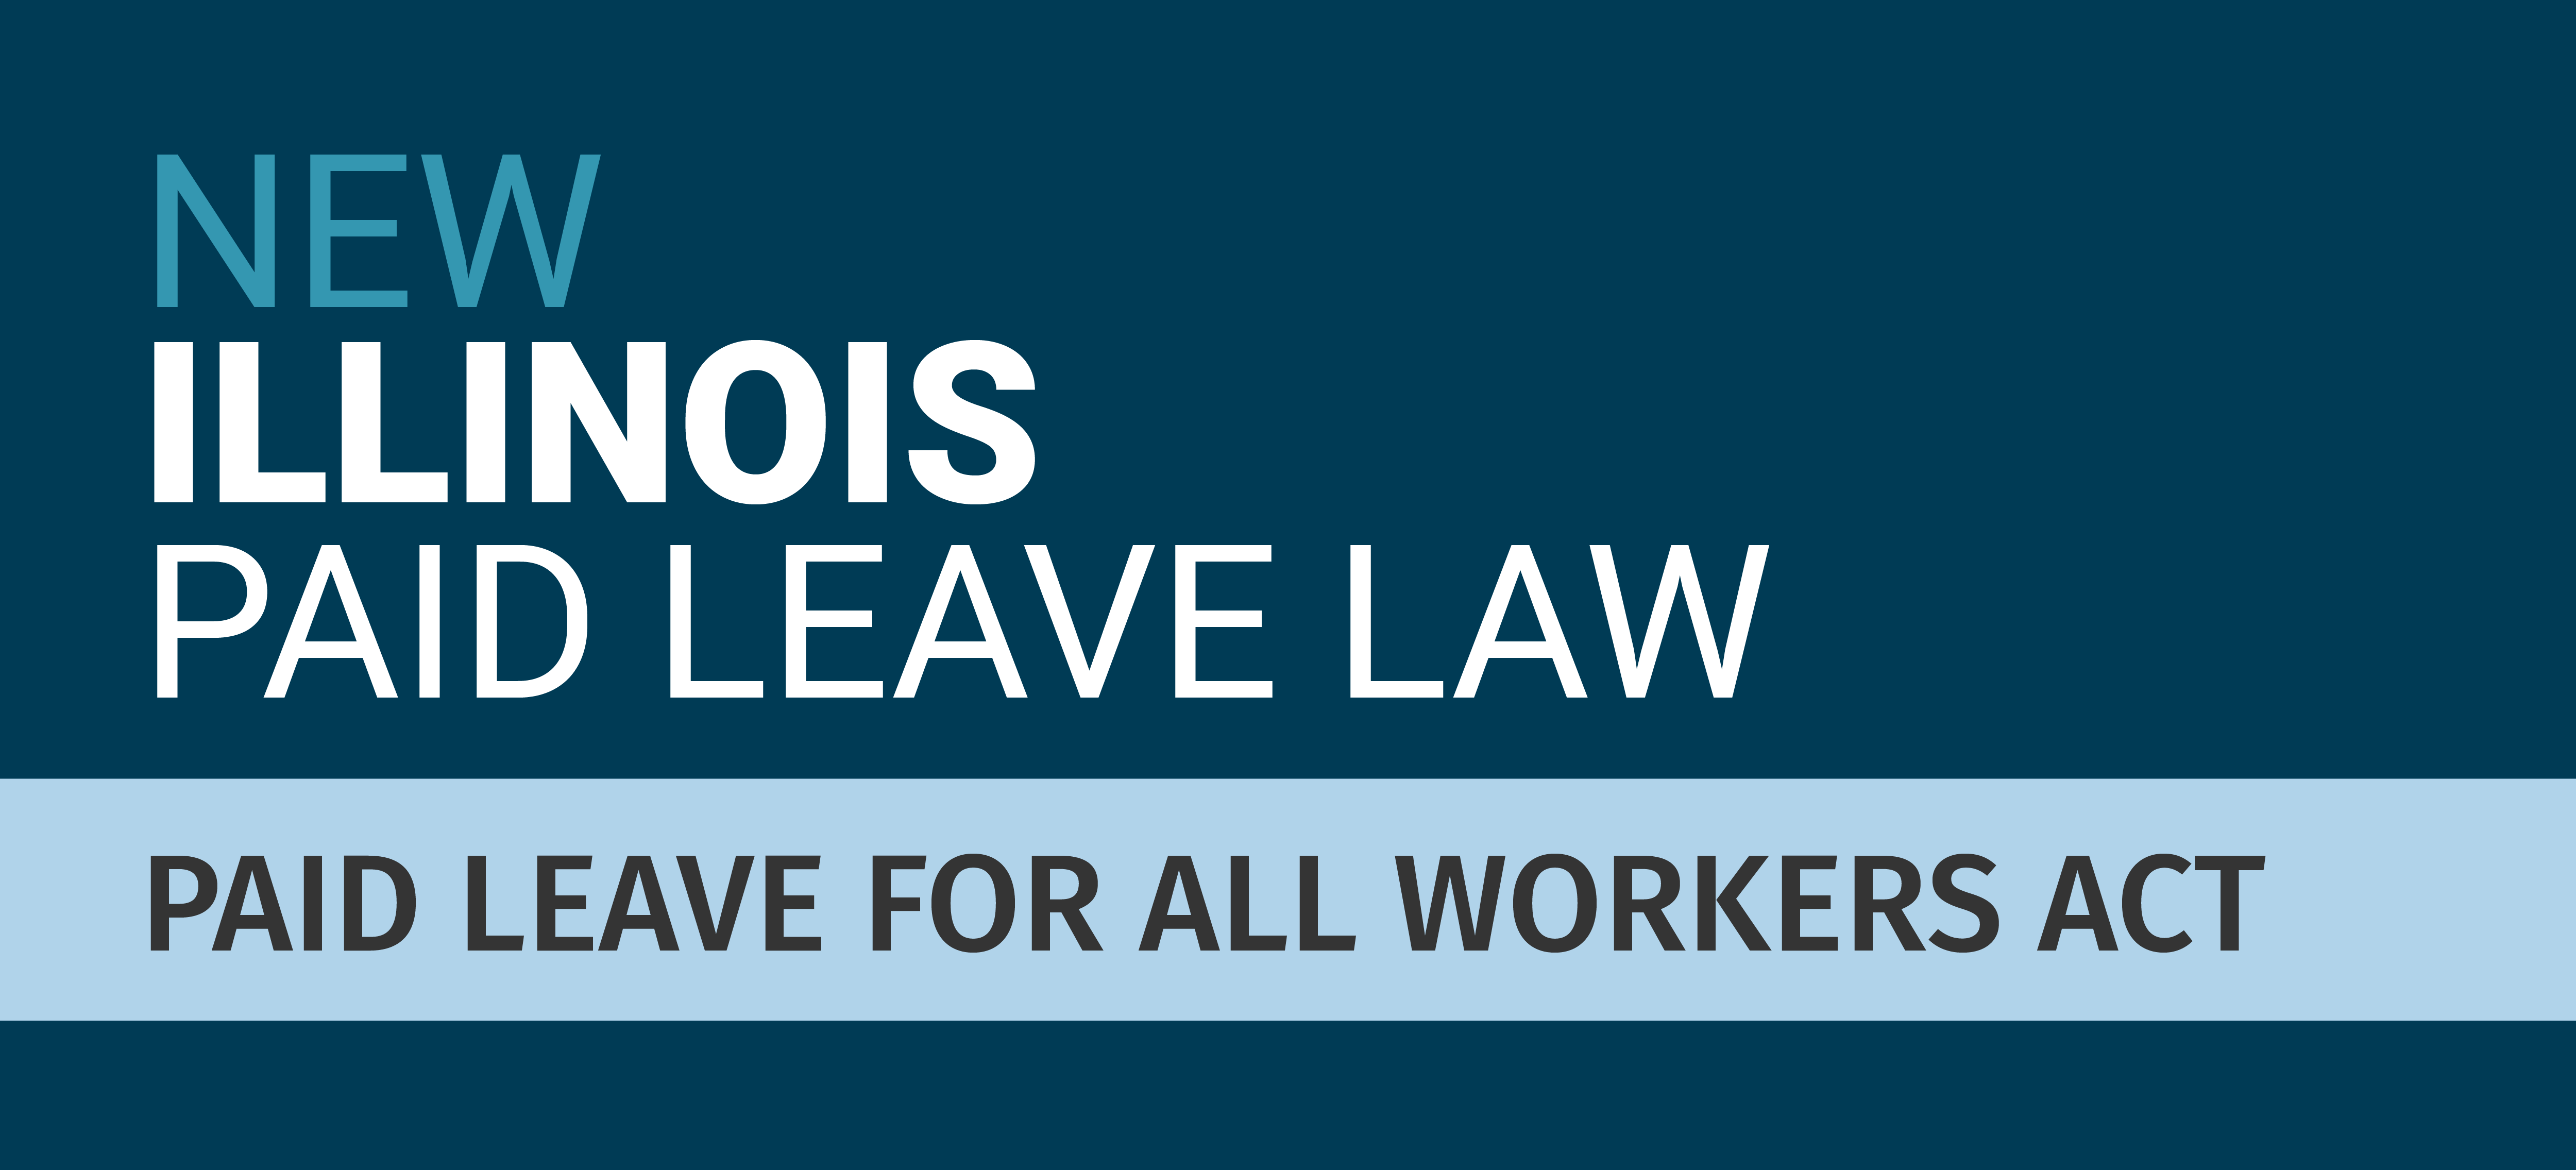 HR Newsletter: New Illinois Paid Leave Law – Significant Changes